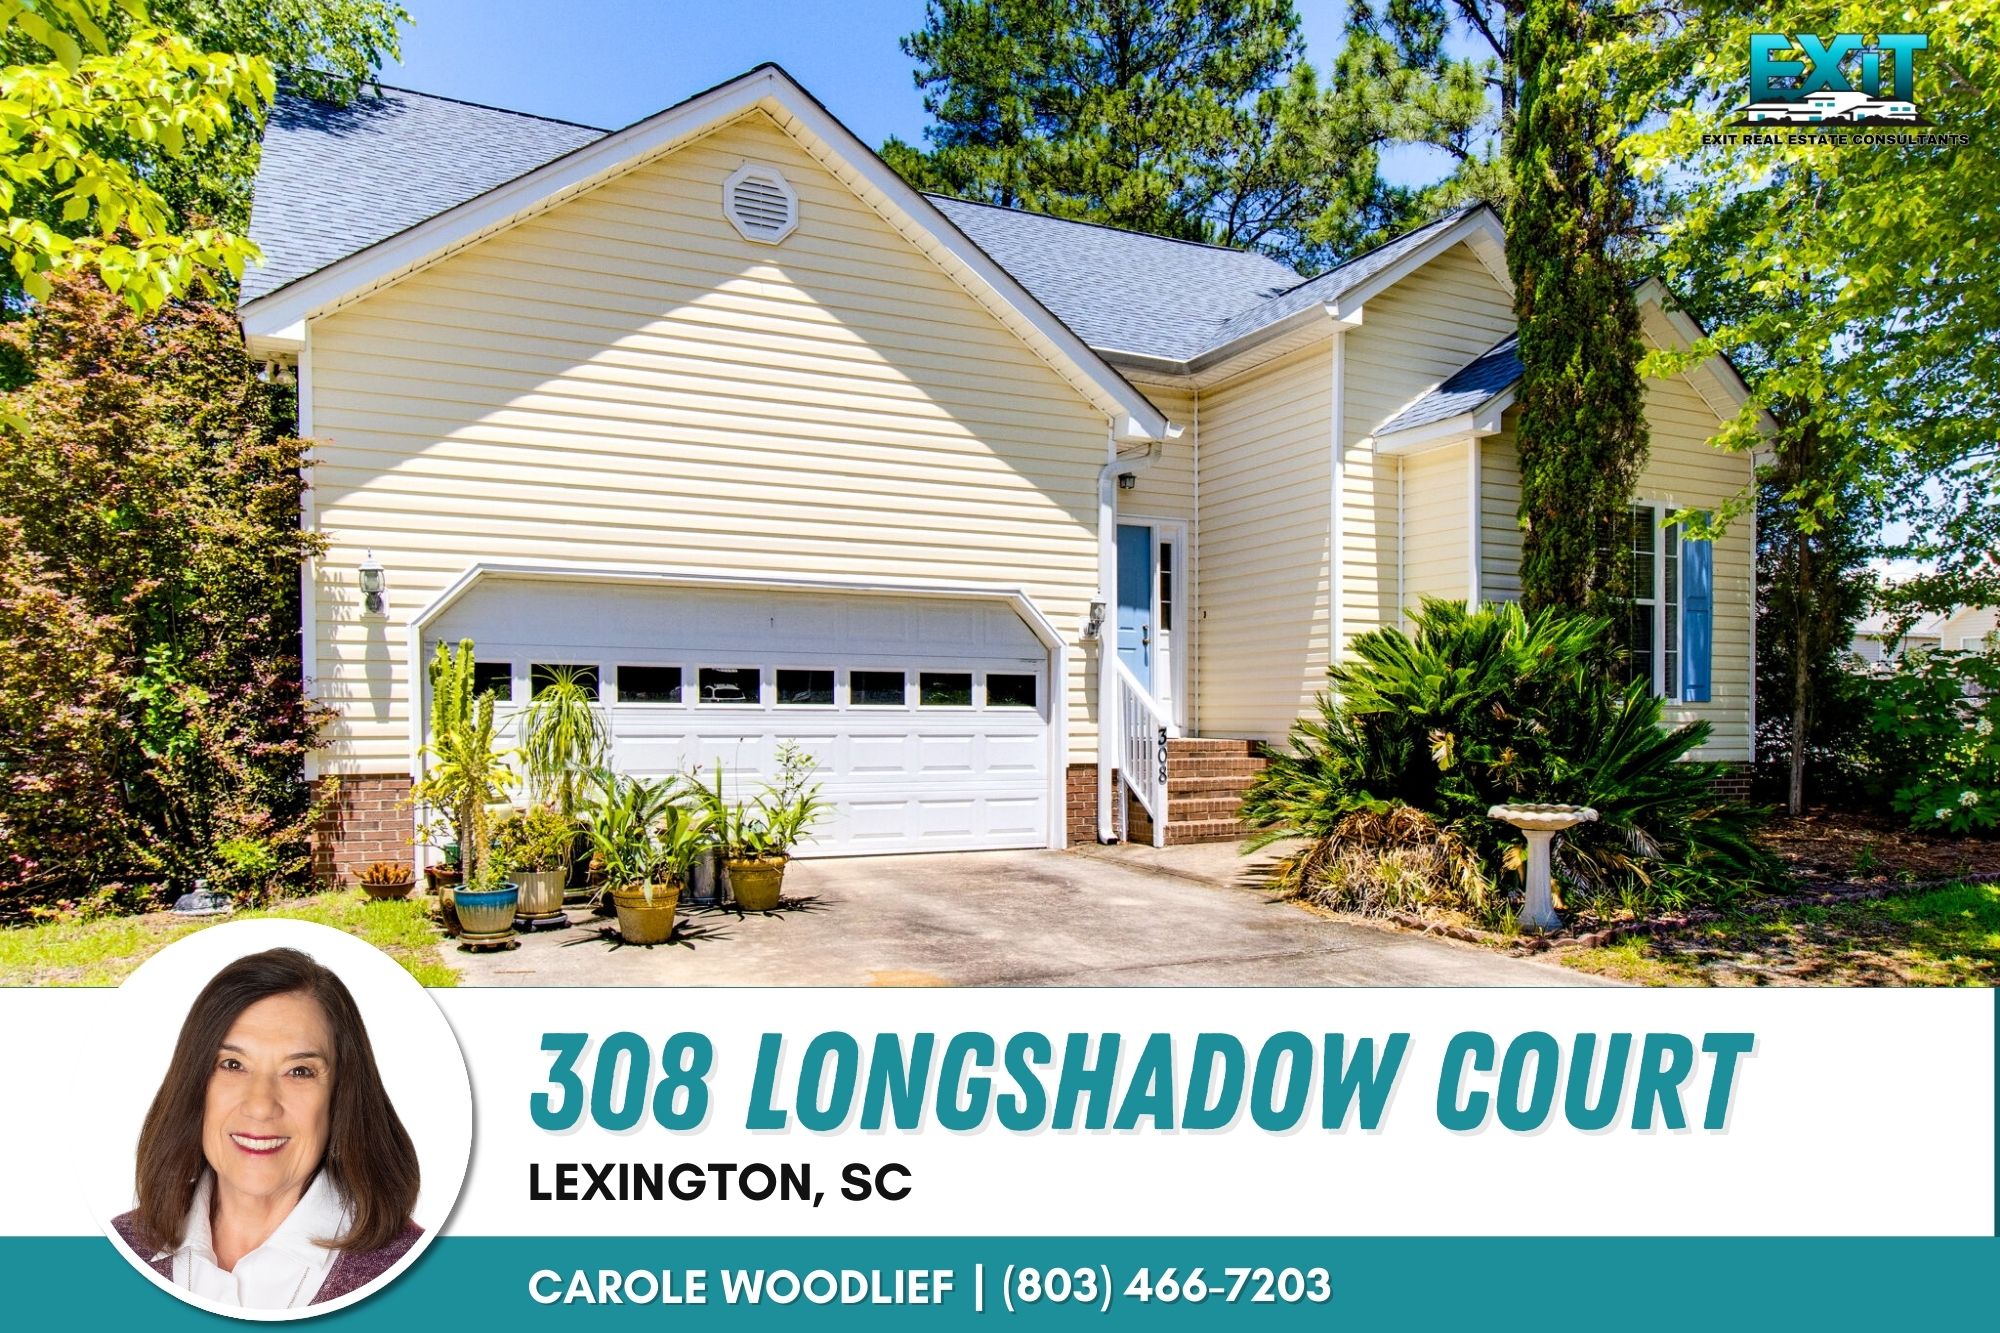 Just listed in Shadowbrooke